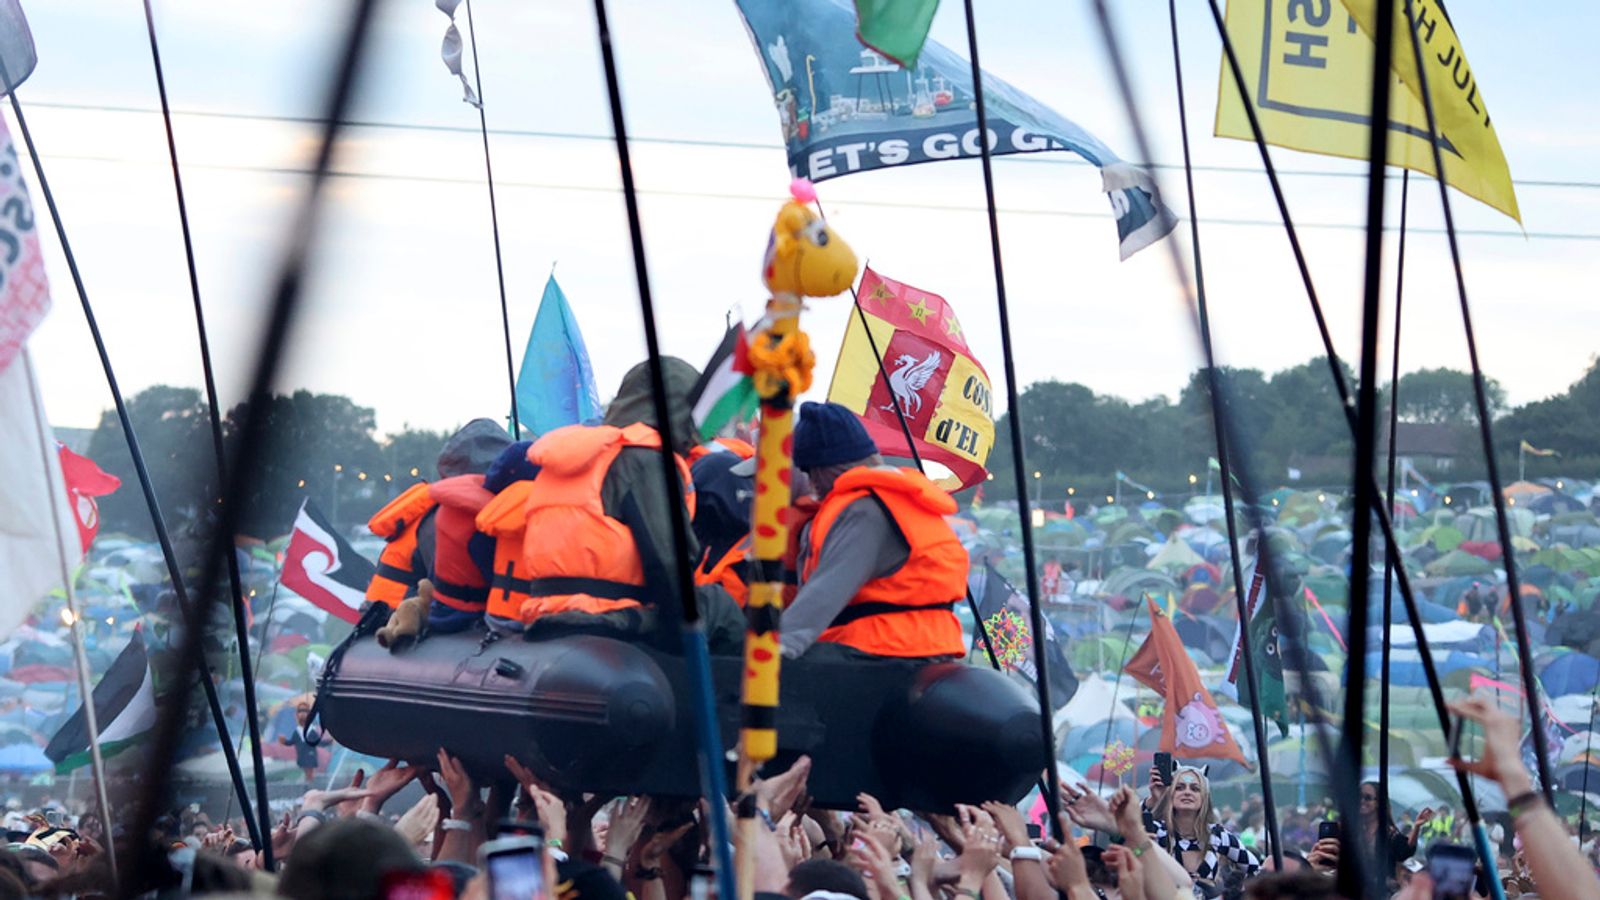 Home Secretary James Cleverly hits out at Banksy's migrant boat Glastonbury stunt